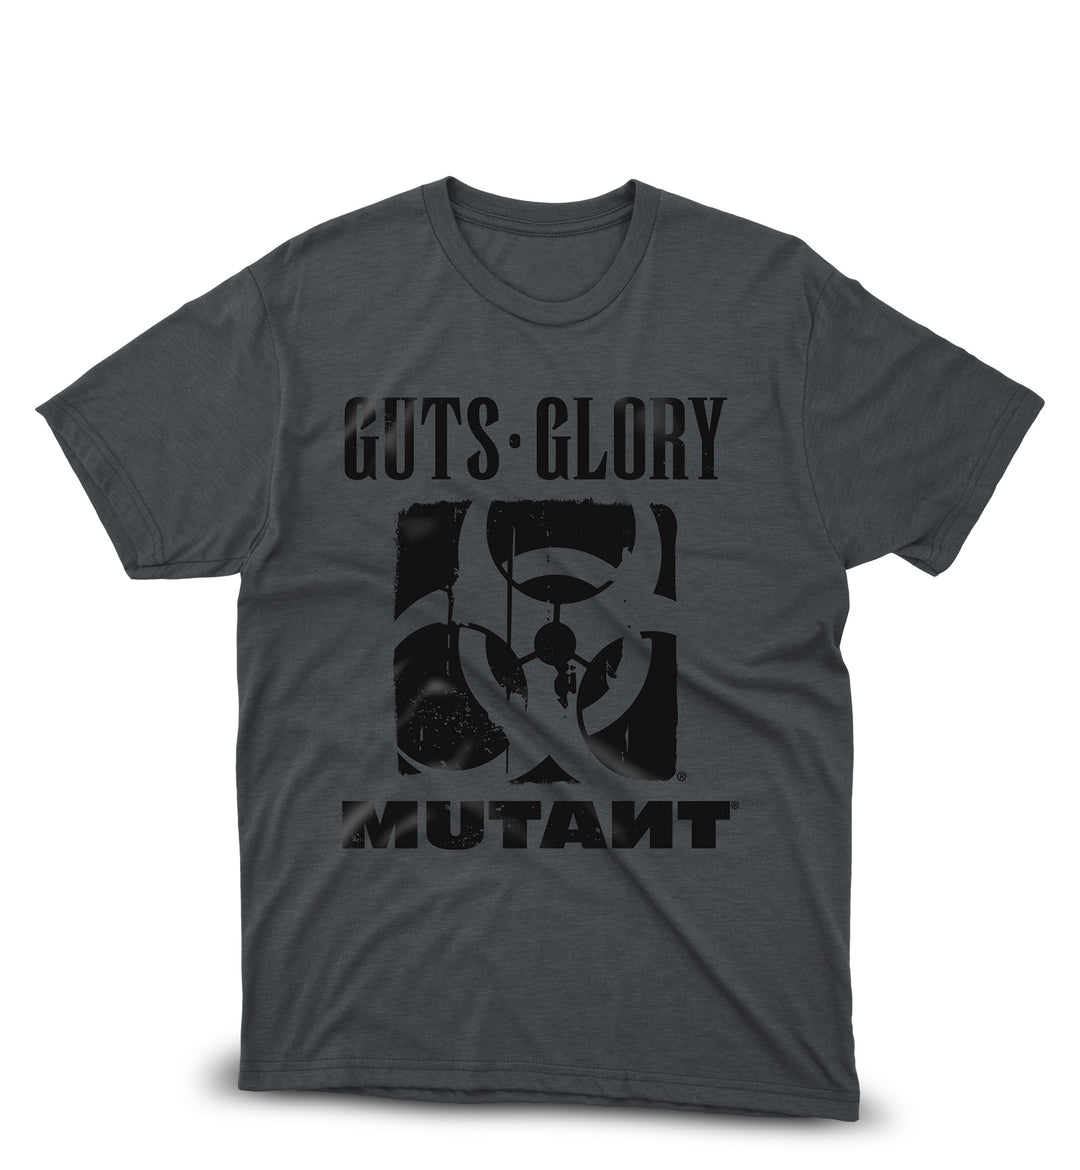 The front view of the grey 'MUTANT's Truck Month' t-shirt featuring the 'Guts, Glory, Mutant' slogan and the MUTANT logo, both printed in black, set against a white background.